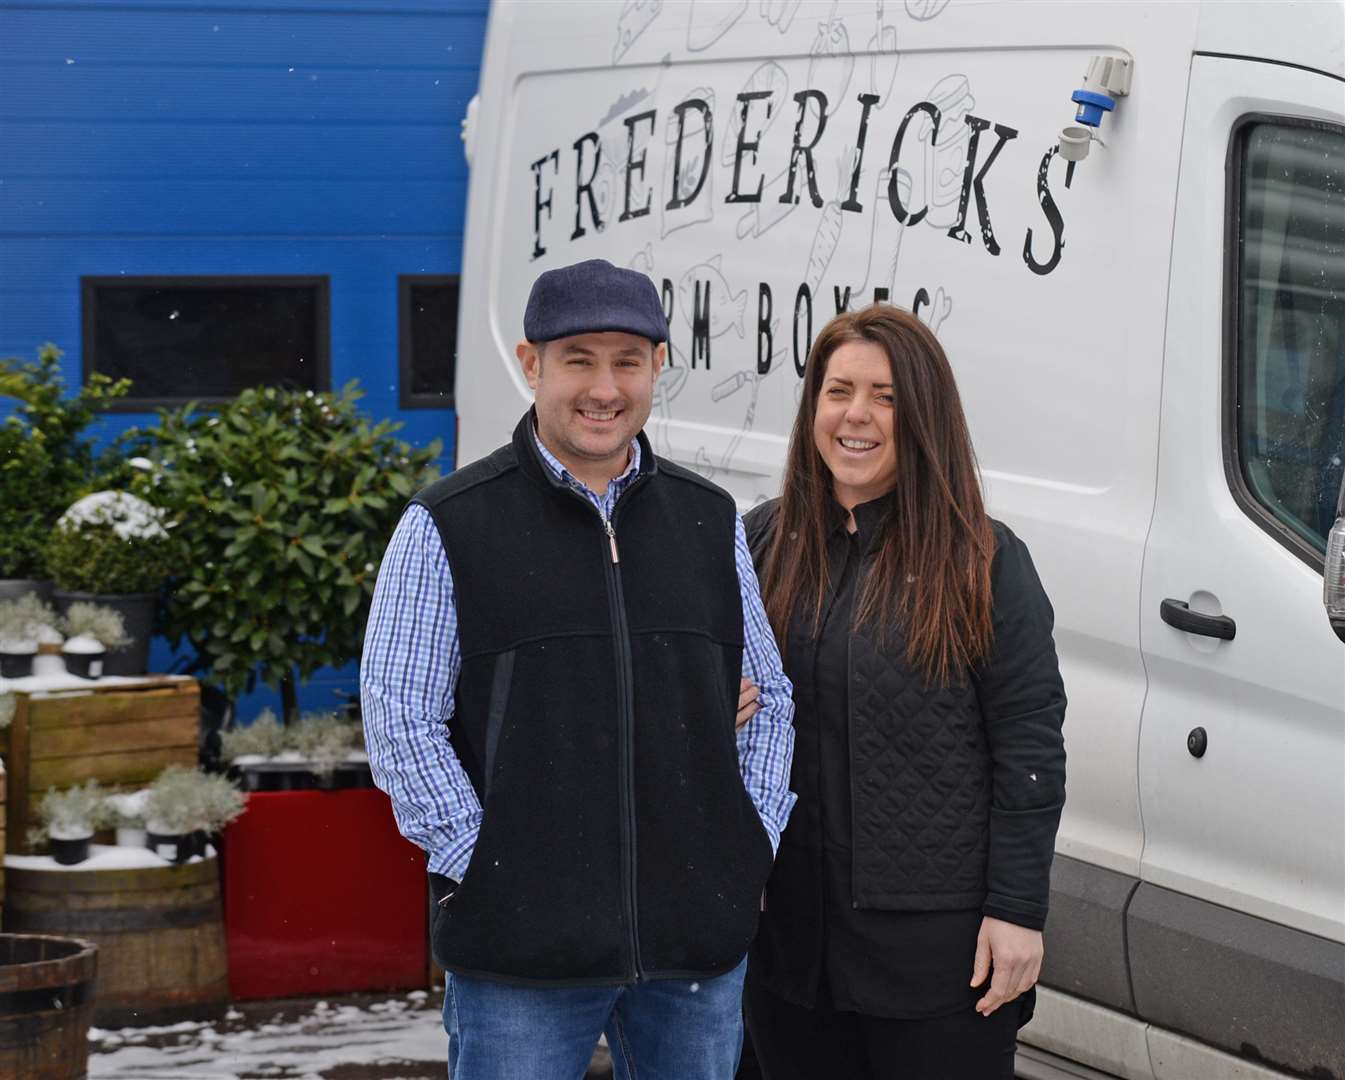 Frederick and Maria Hopkinson deliver their produce, homewares and gifts nationwide. Picture: Vikki Lince